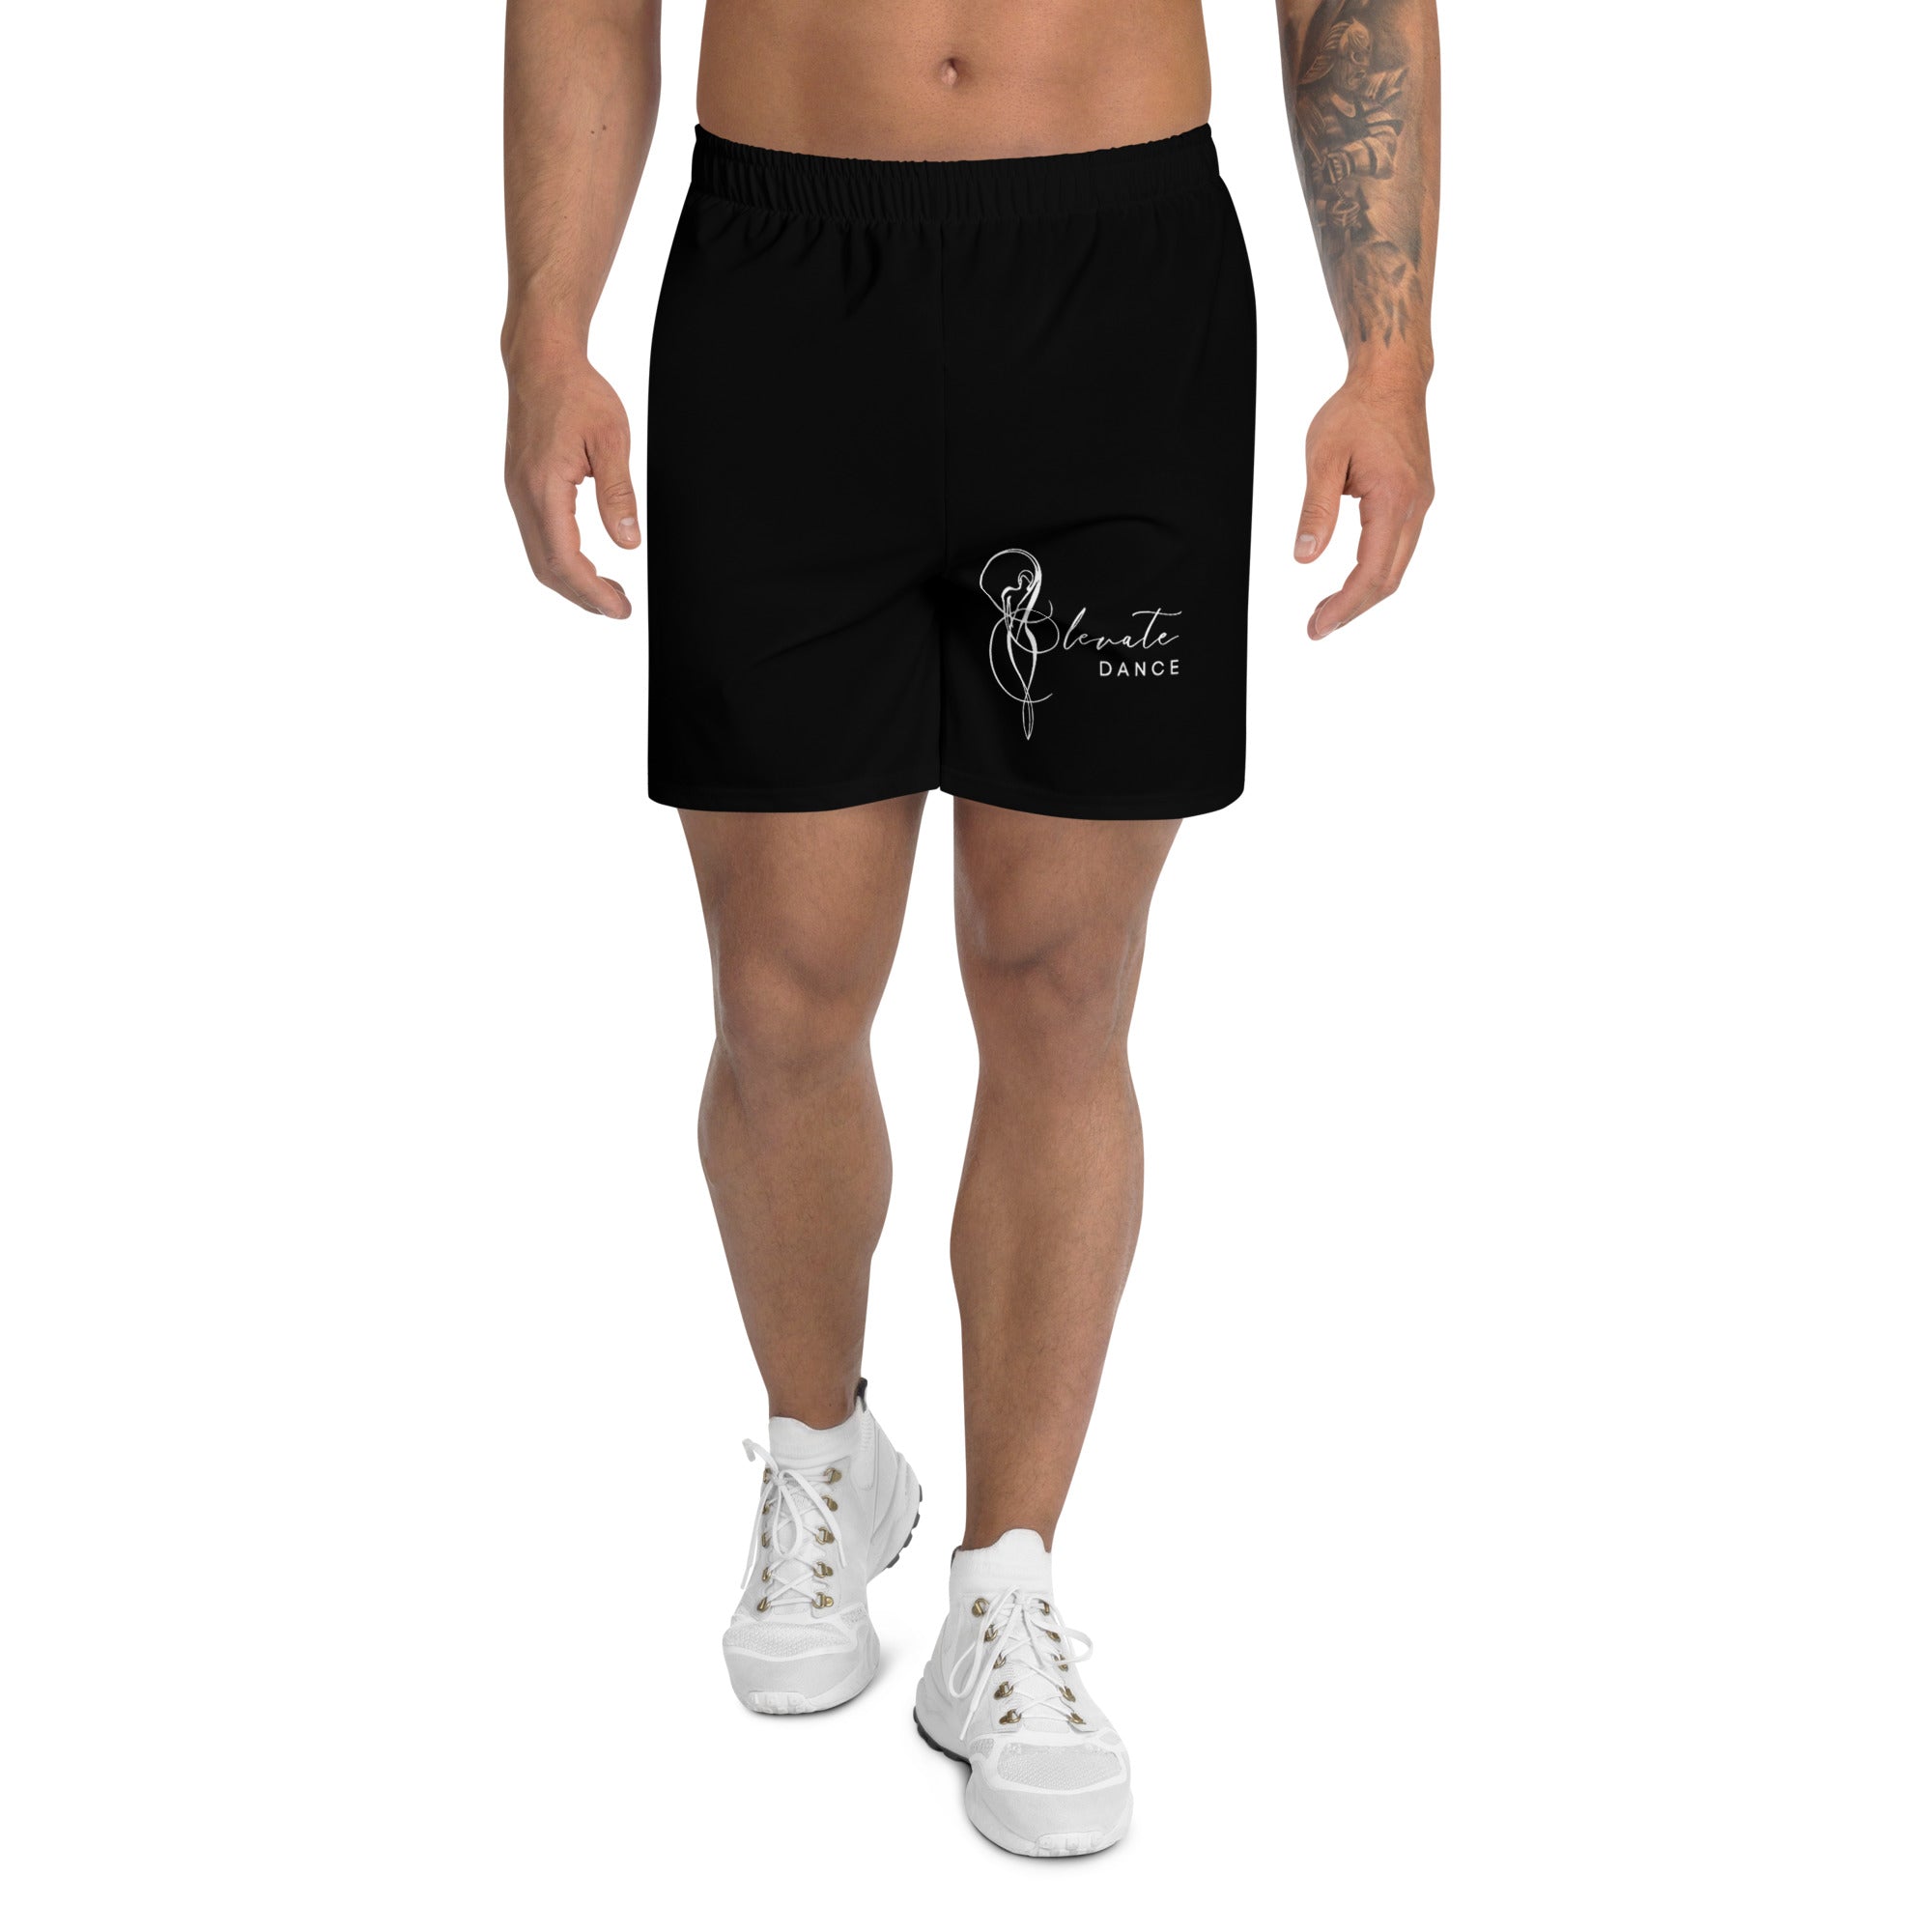 Elevate Dance Men's Recycled Athletic Shorts